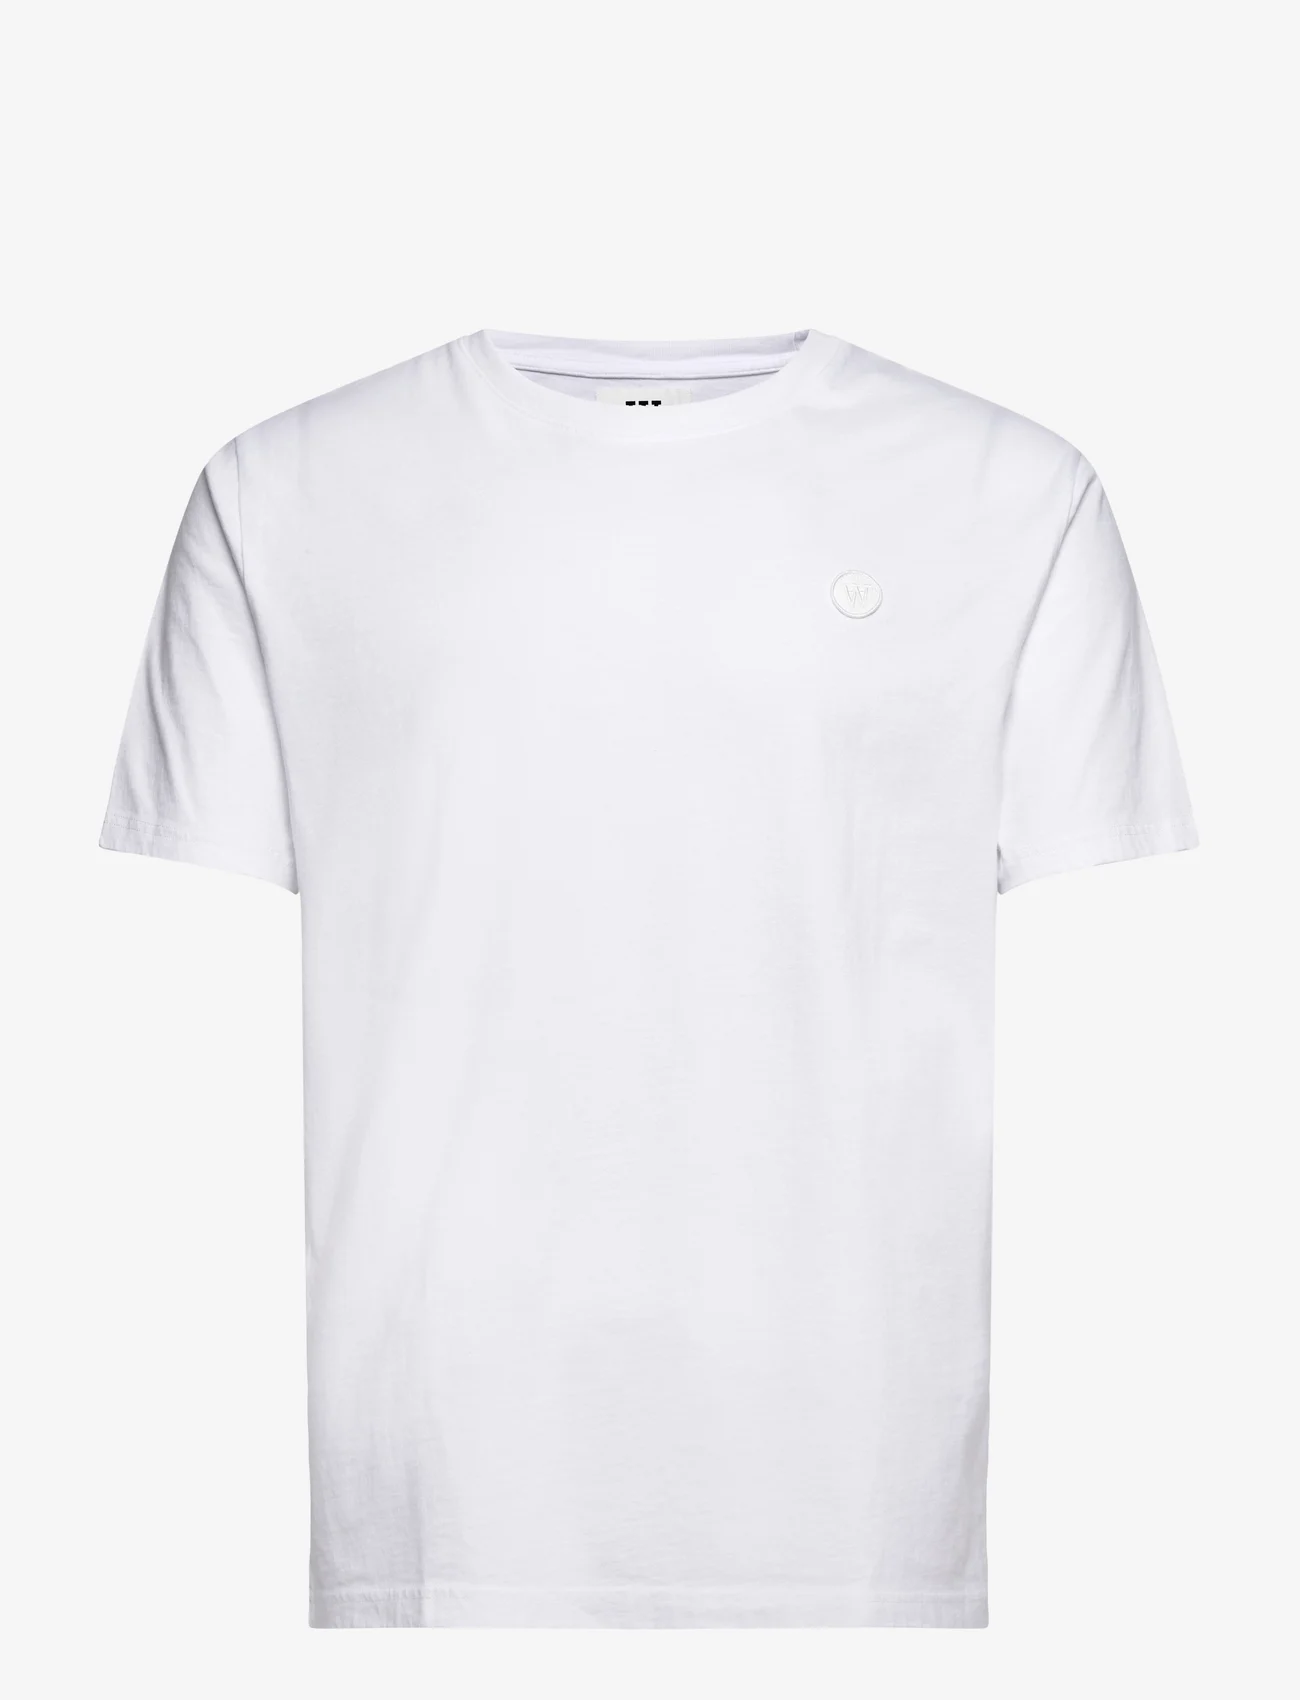 Double A by Wood Wood - Ace T-shirt - kortærmede - white/white - 0